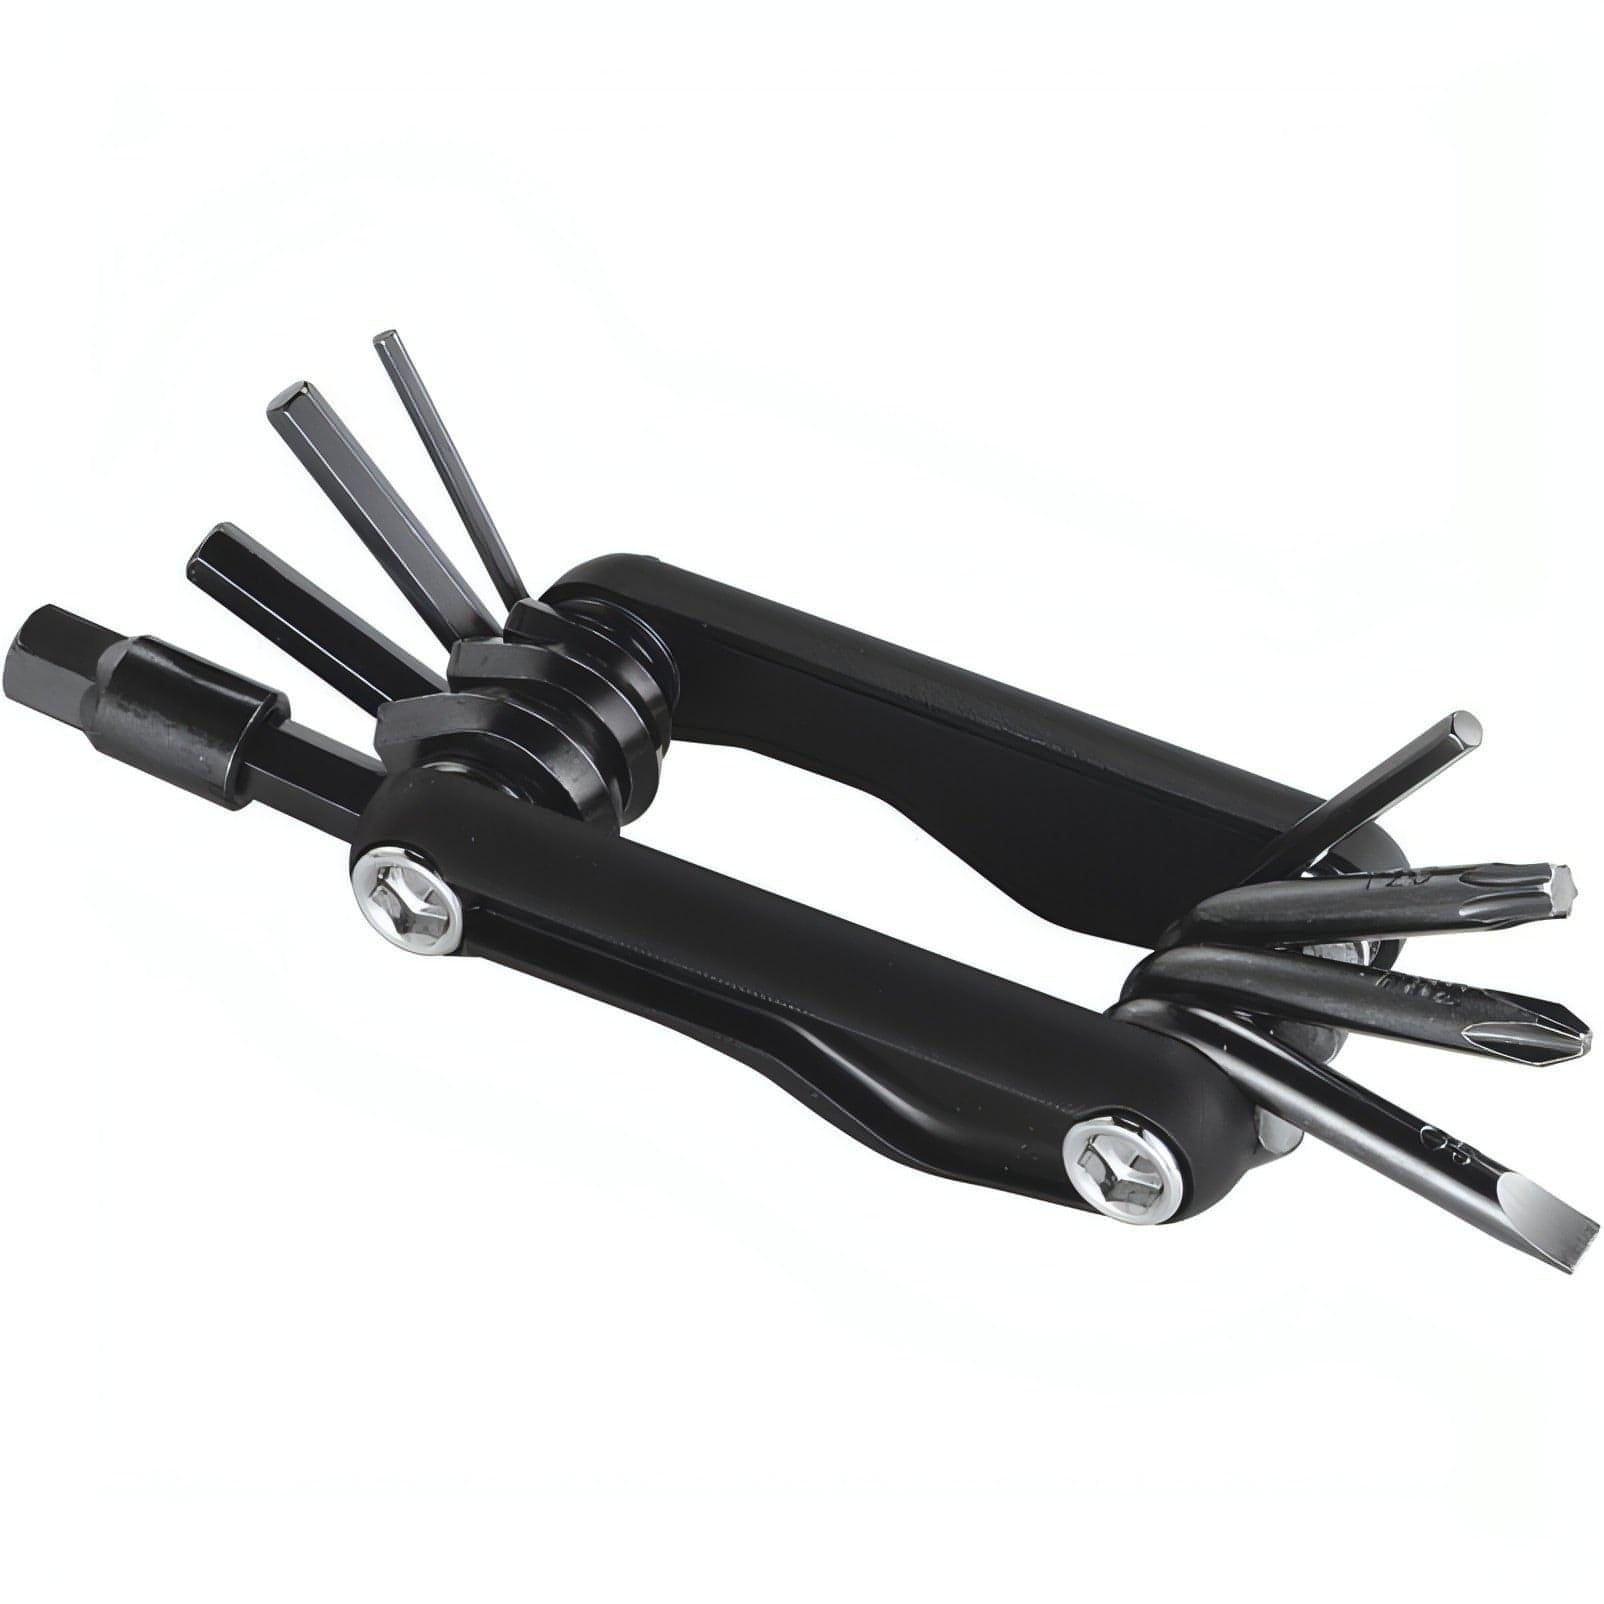 Syncros Composite 9 Bicycle Multi Tool - Black 7613257560932 - Start Fitness